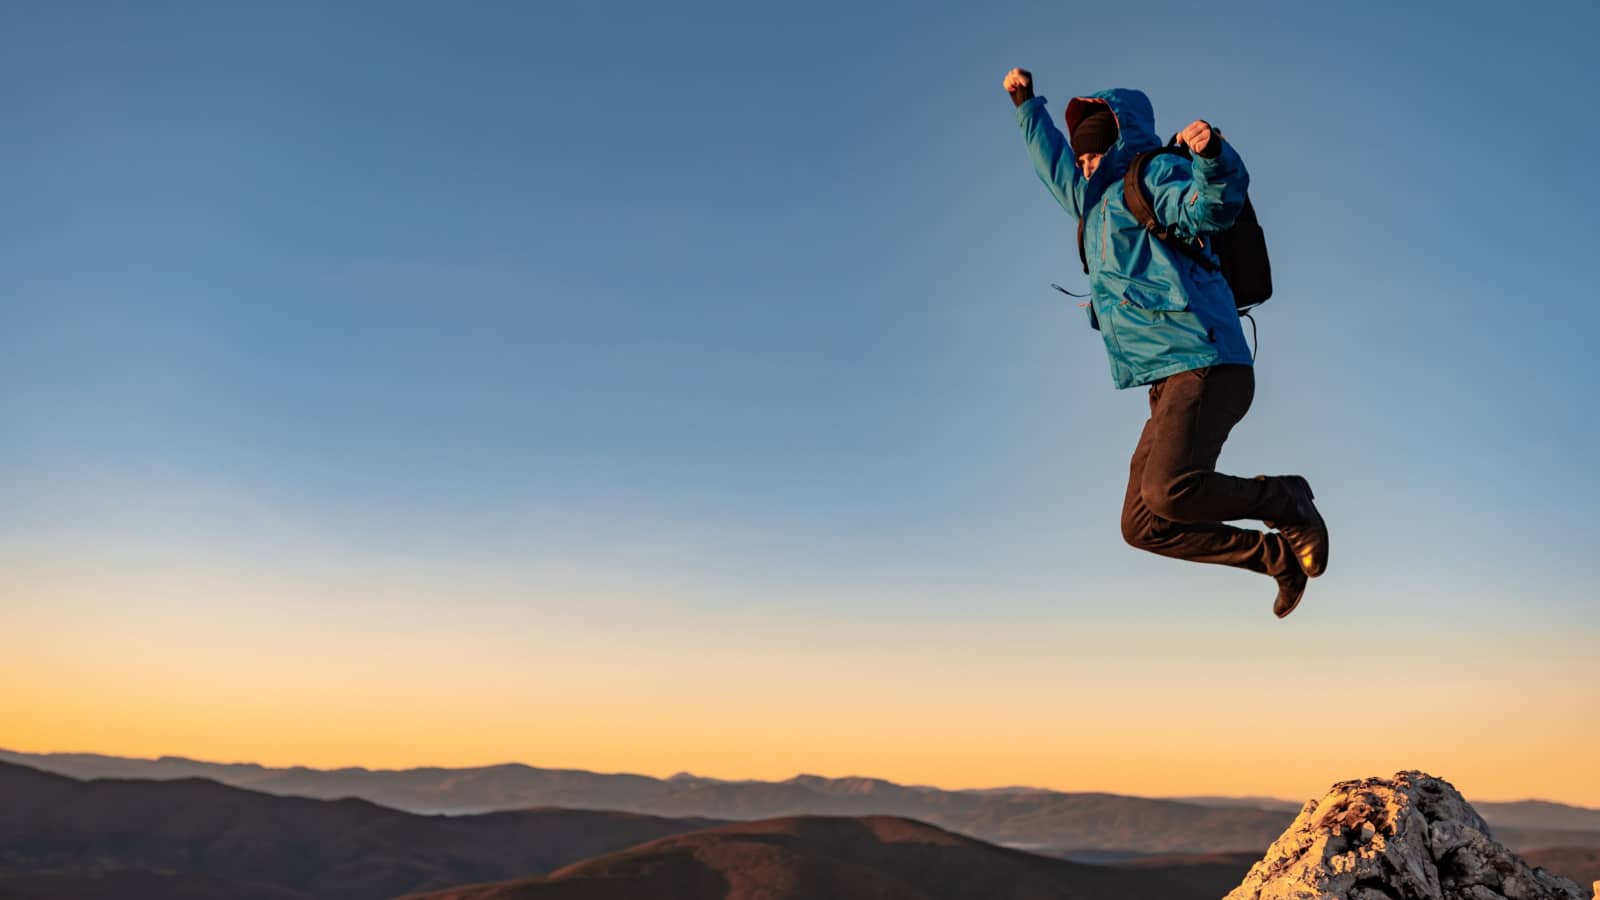 A happy joyful man jumping on top of a mountain concept of adventure travel extreme sport hiking.